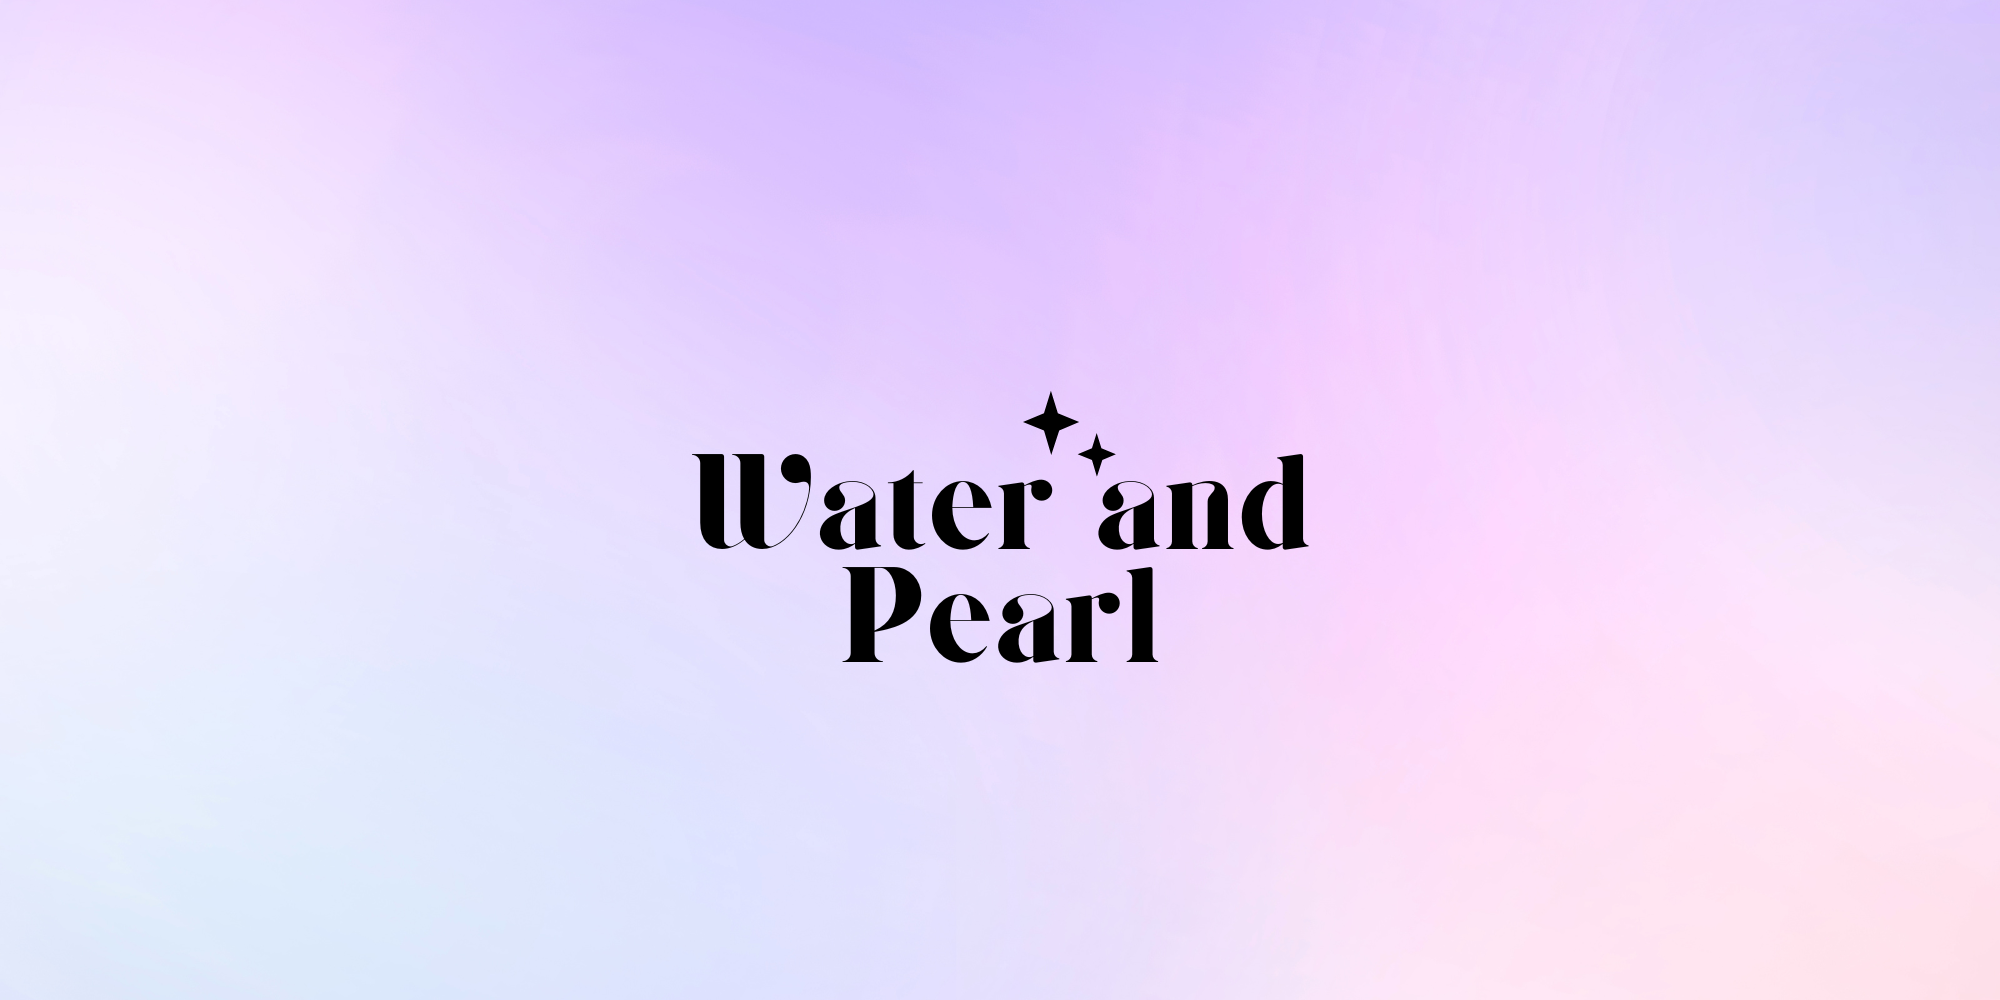 Water and Pearl